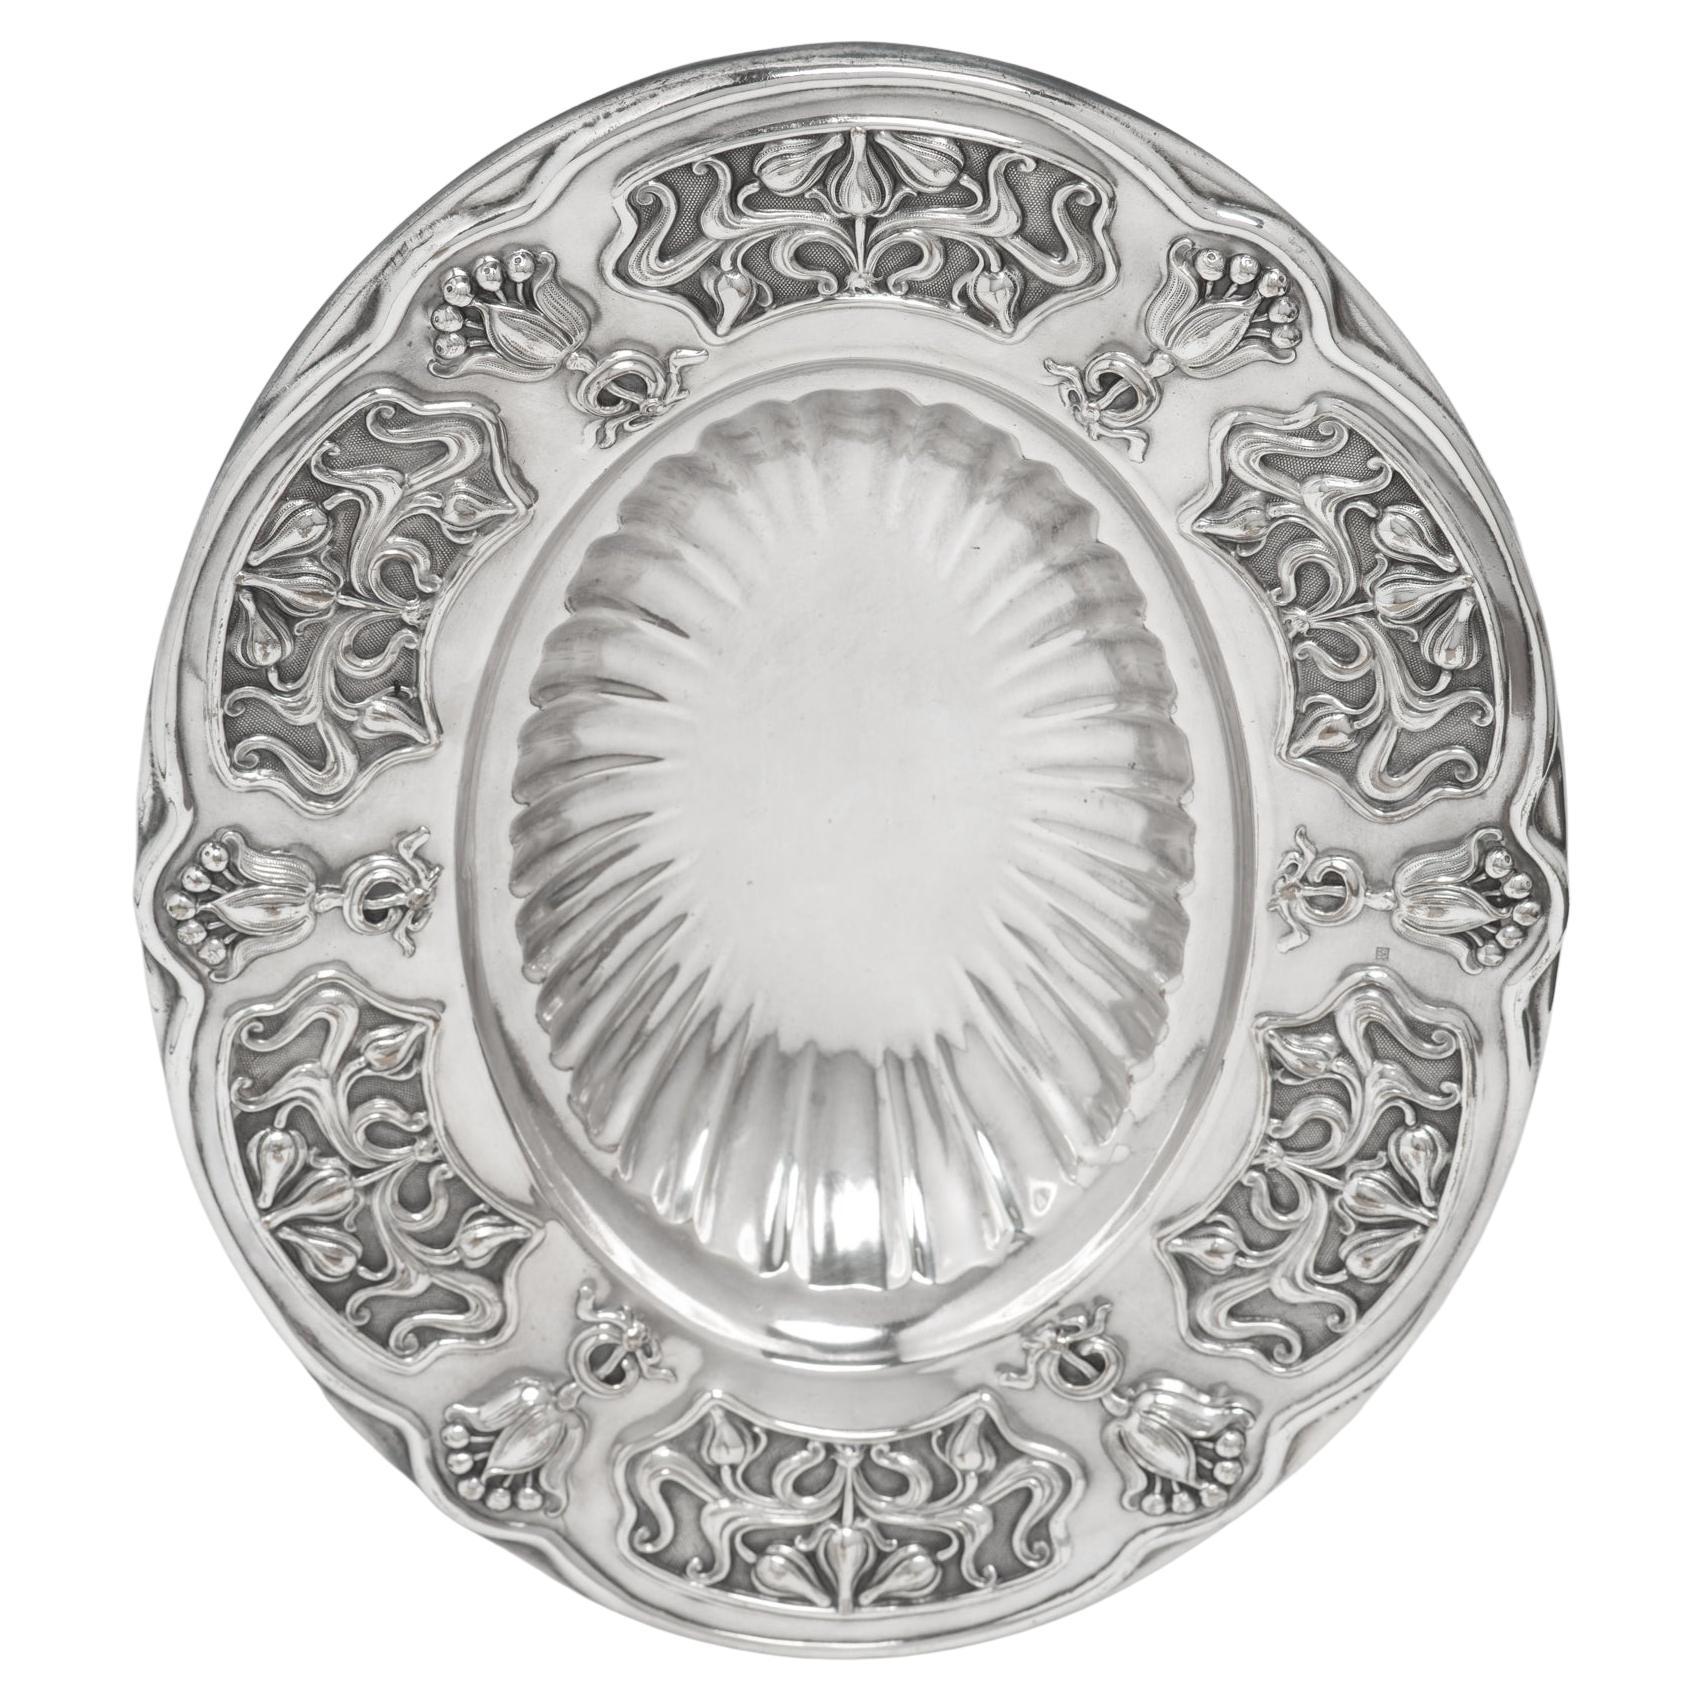 Liberty Oval Centerpiece in Silver Plate